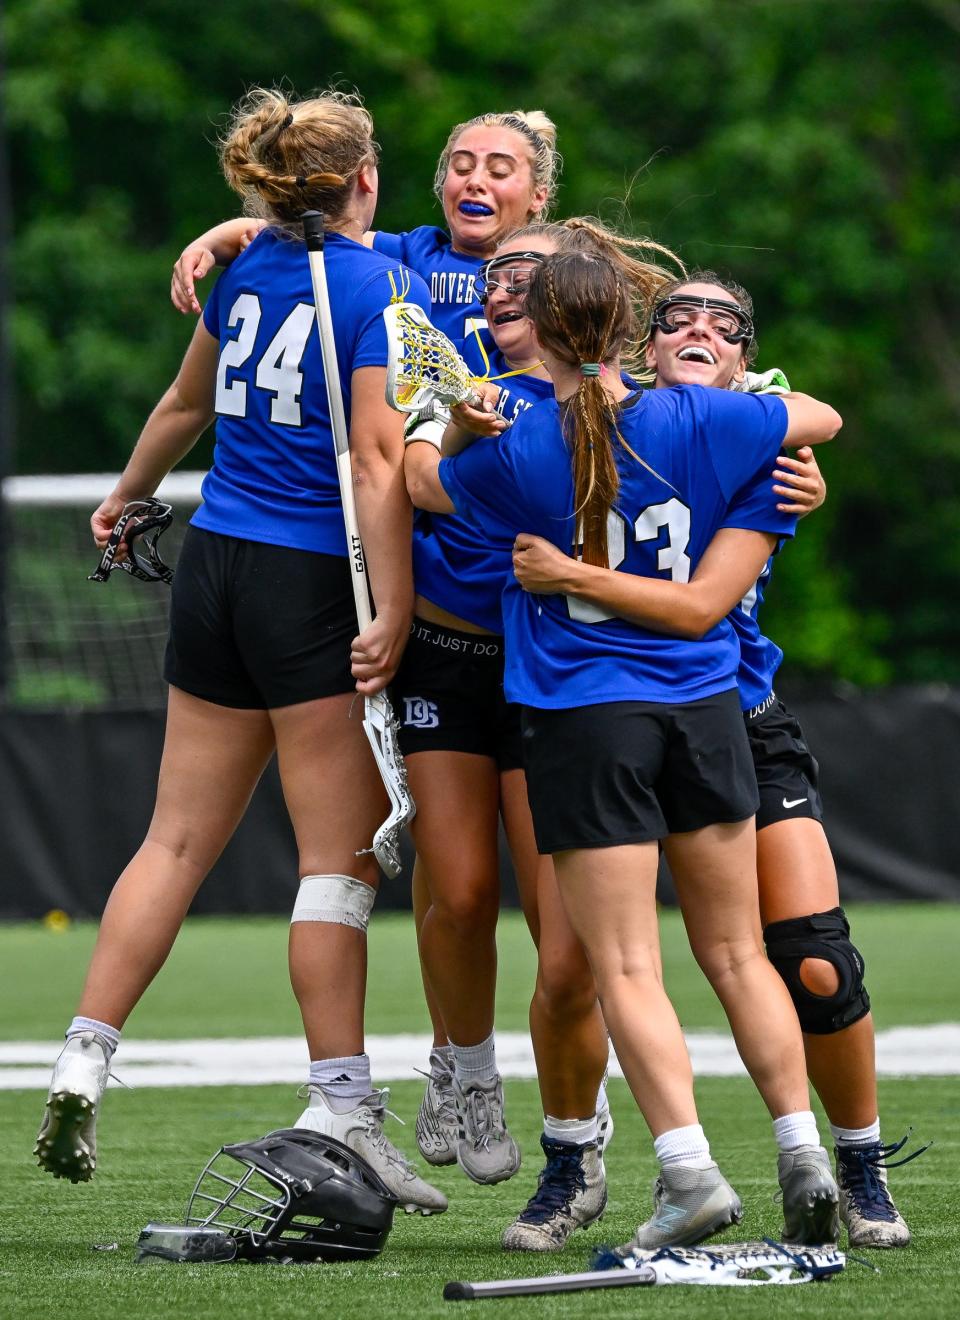 Sadie Mauro (center) celebrates with her Dover-Sherborn High School teammates after defeating Ipswich in the Division 4 state championship game on June 18. Mauro was killed on July 21 when the boat she was riding in collided with a jetty in East Dennis.